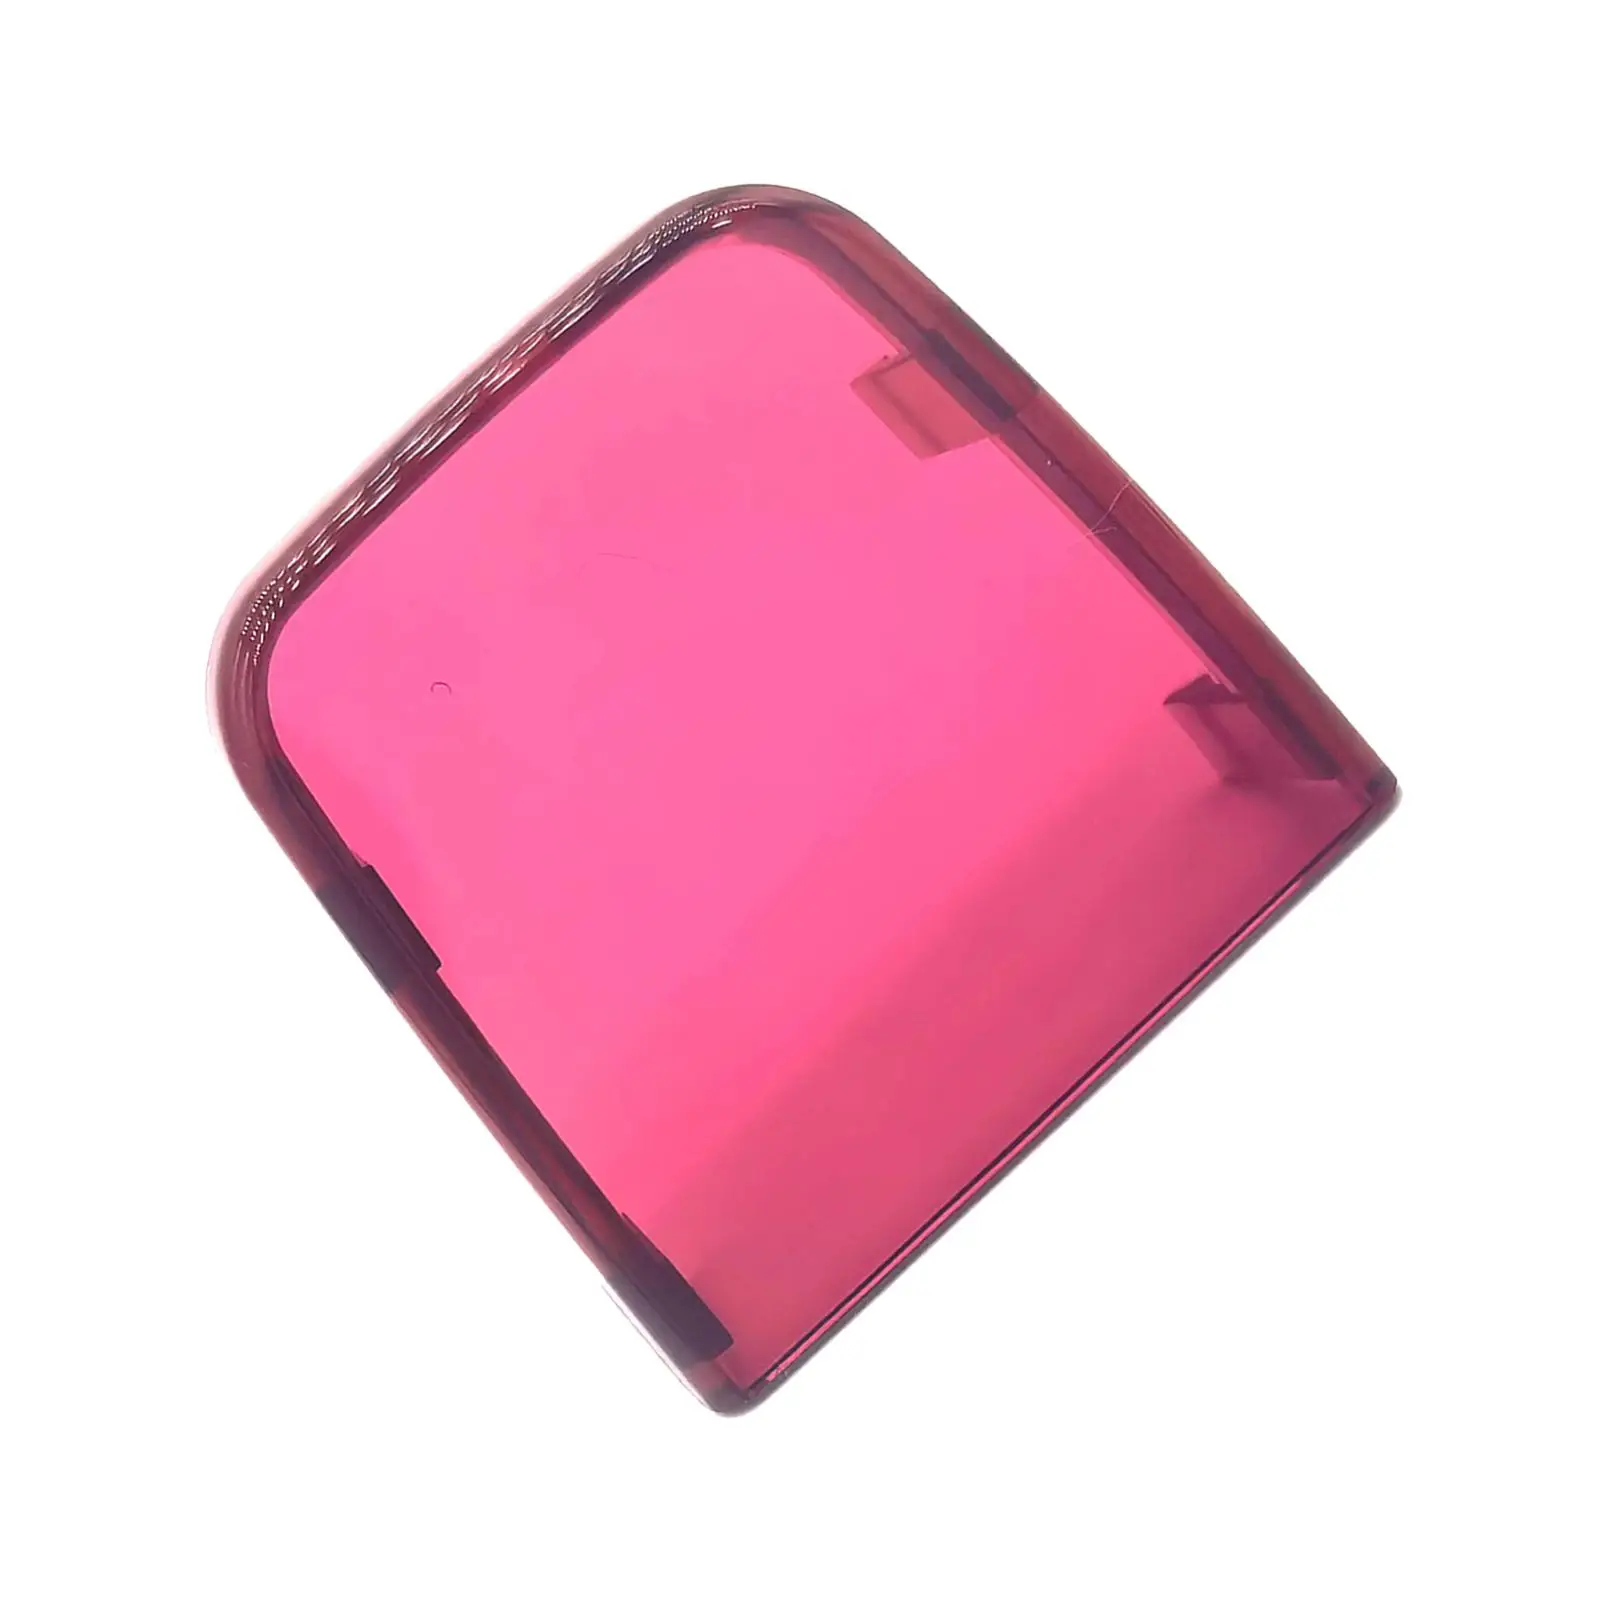 Durable Focusing Light Lid Pink Camera Flash light Cover Cap for Yn568EX Maintenance Spare Parts Repair Replacement